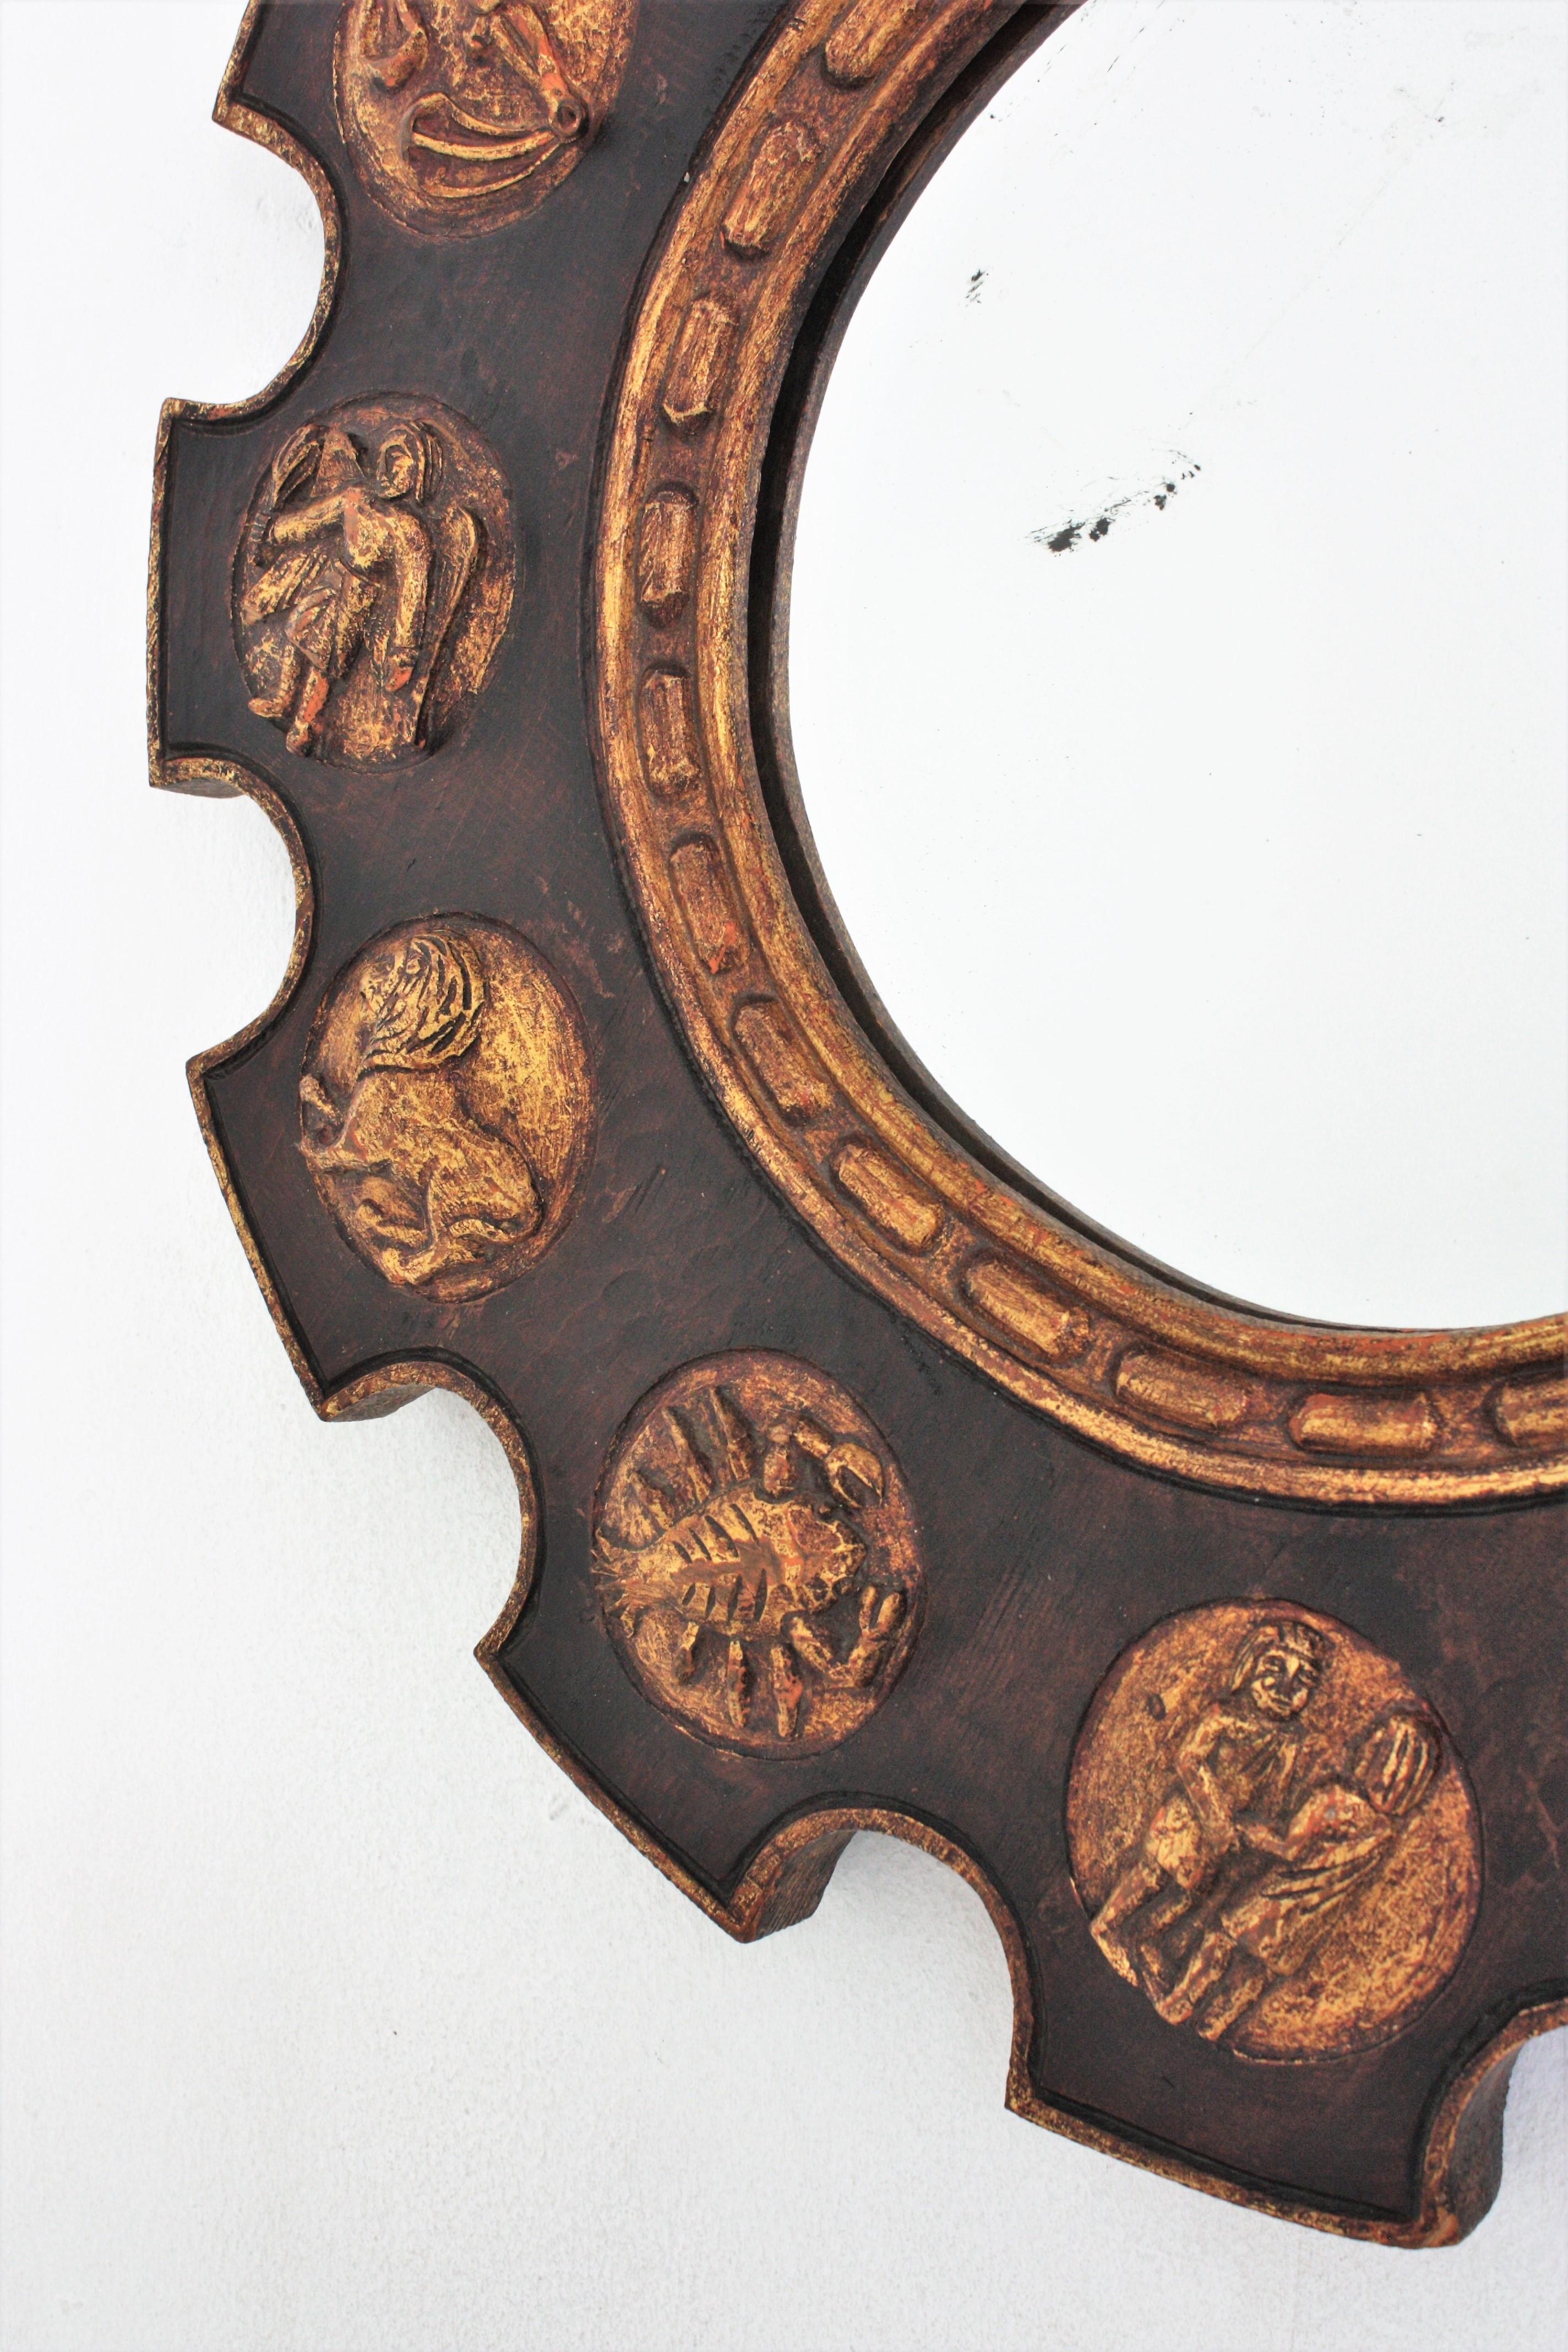 Spanish Zodiac Sunburst Mirror with Brown Giltwood Carved Frame For Sale 4